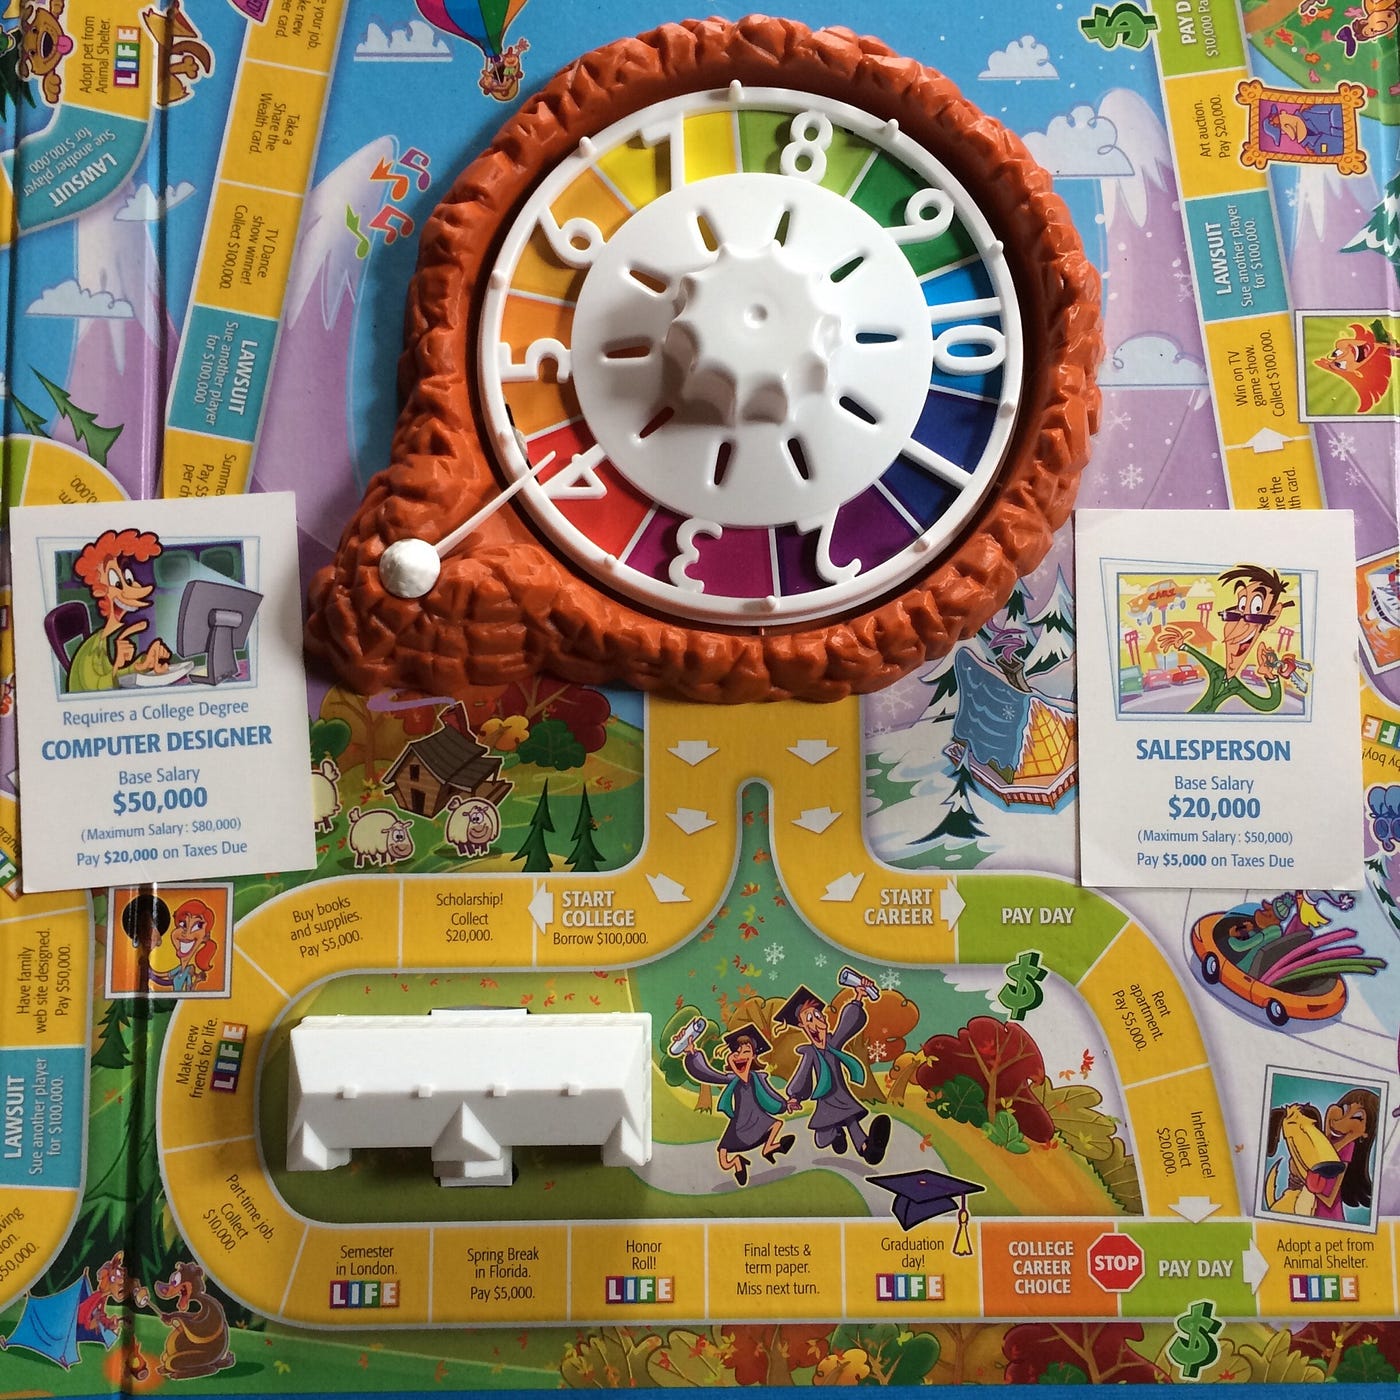 I Taught With The Game of Life